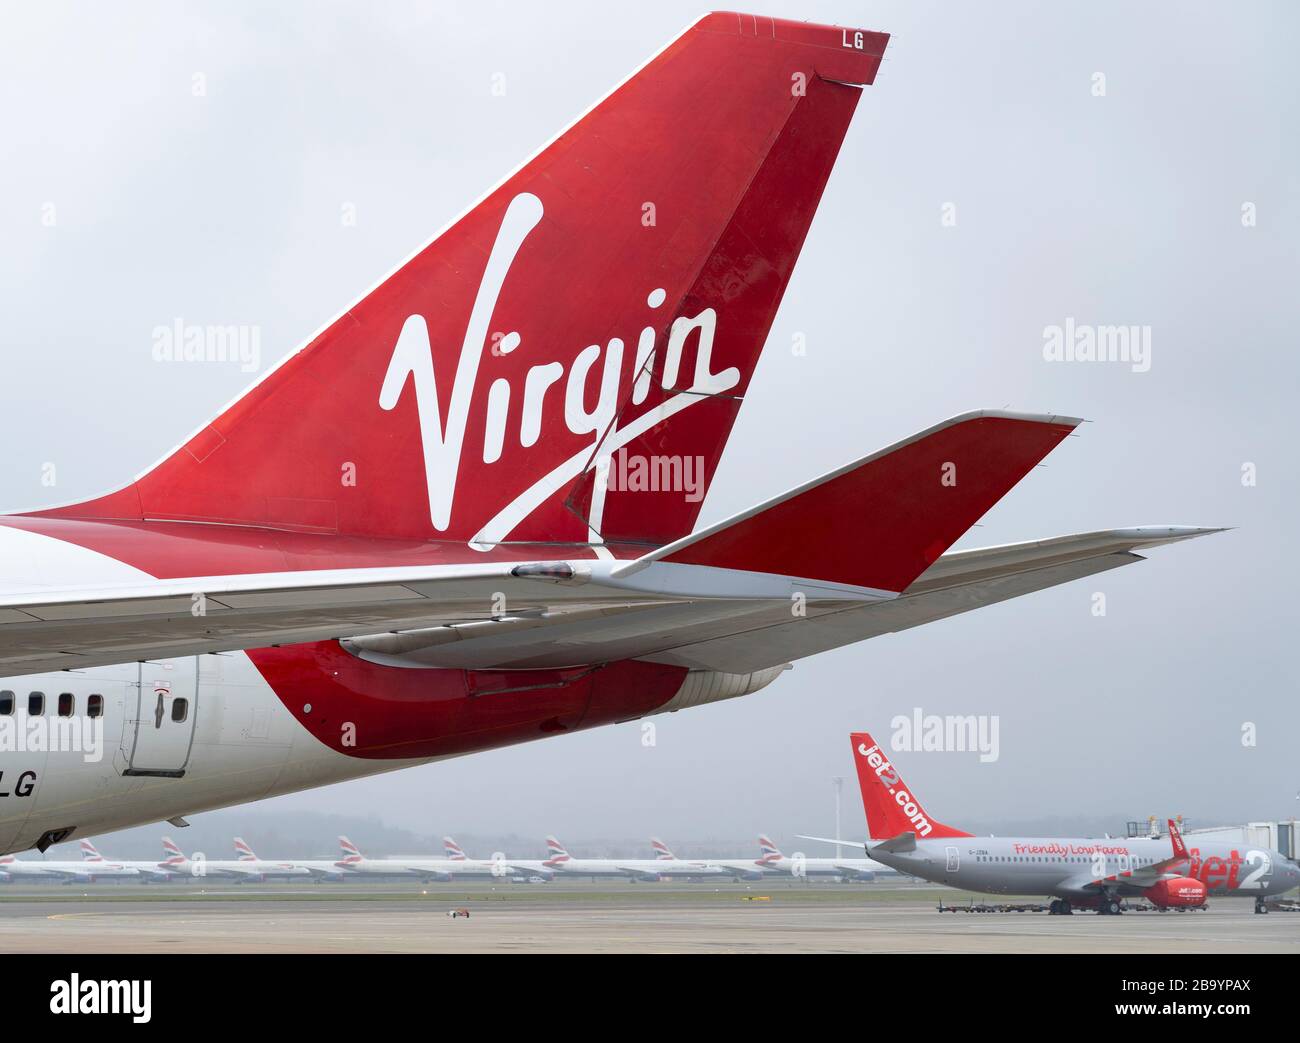 Glasgow, Scotland, UK. 25 March, 2020. Day two of the Government enforced lockdown in the UK. All shops and restaurants and most workplaces remain closed. Cities are very quiet with vast majority of population staying indoors. Pictured; Virgin Atlantic and other passenger aircraft remain grounded and parked at Glasgow Airport. Iain Masterton/Alamy Live News Stock Photo